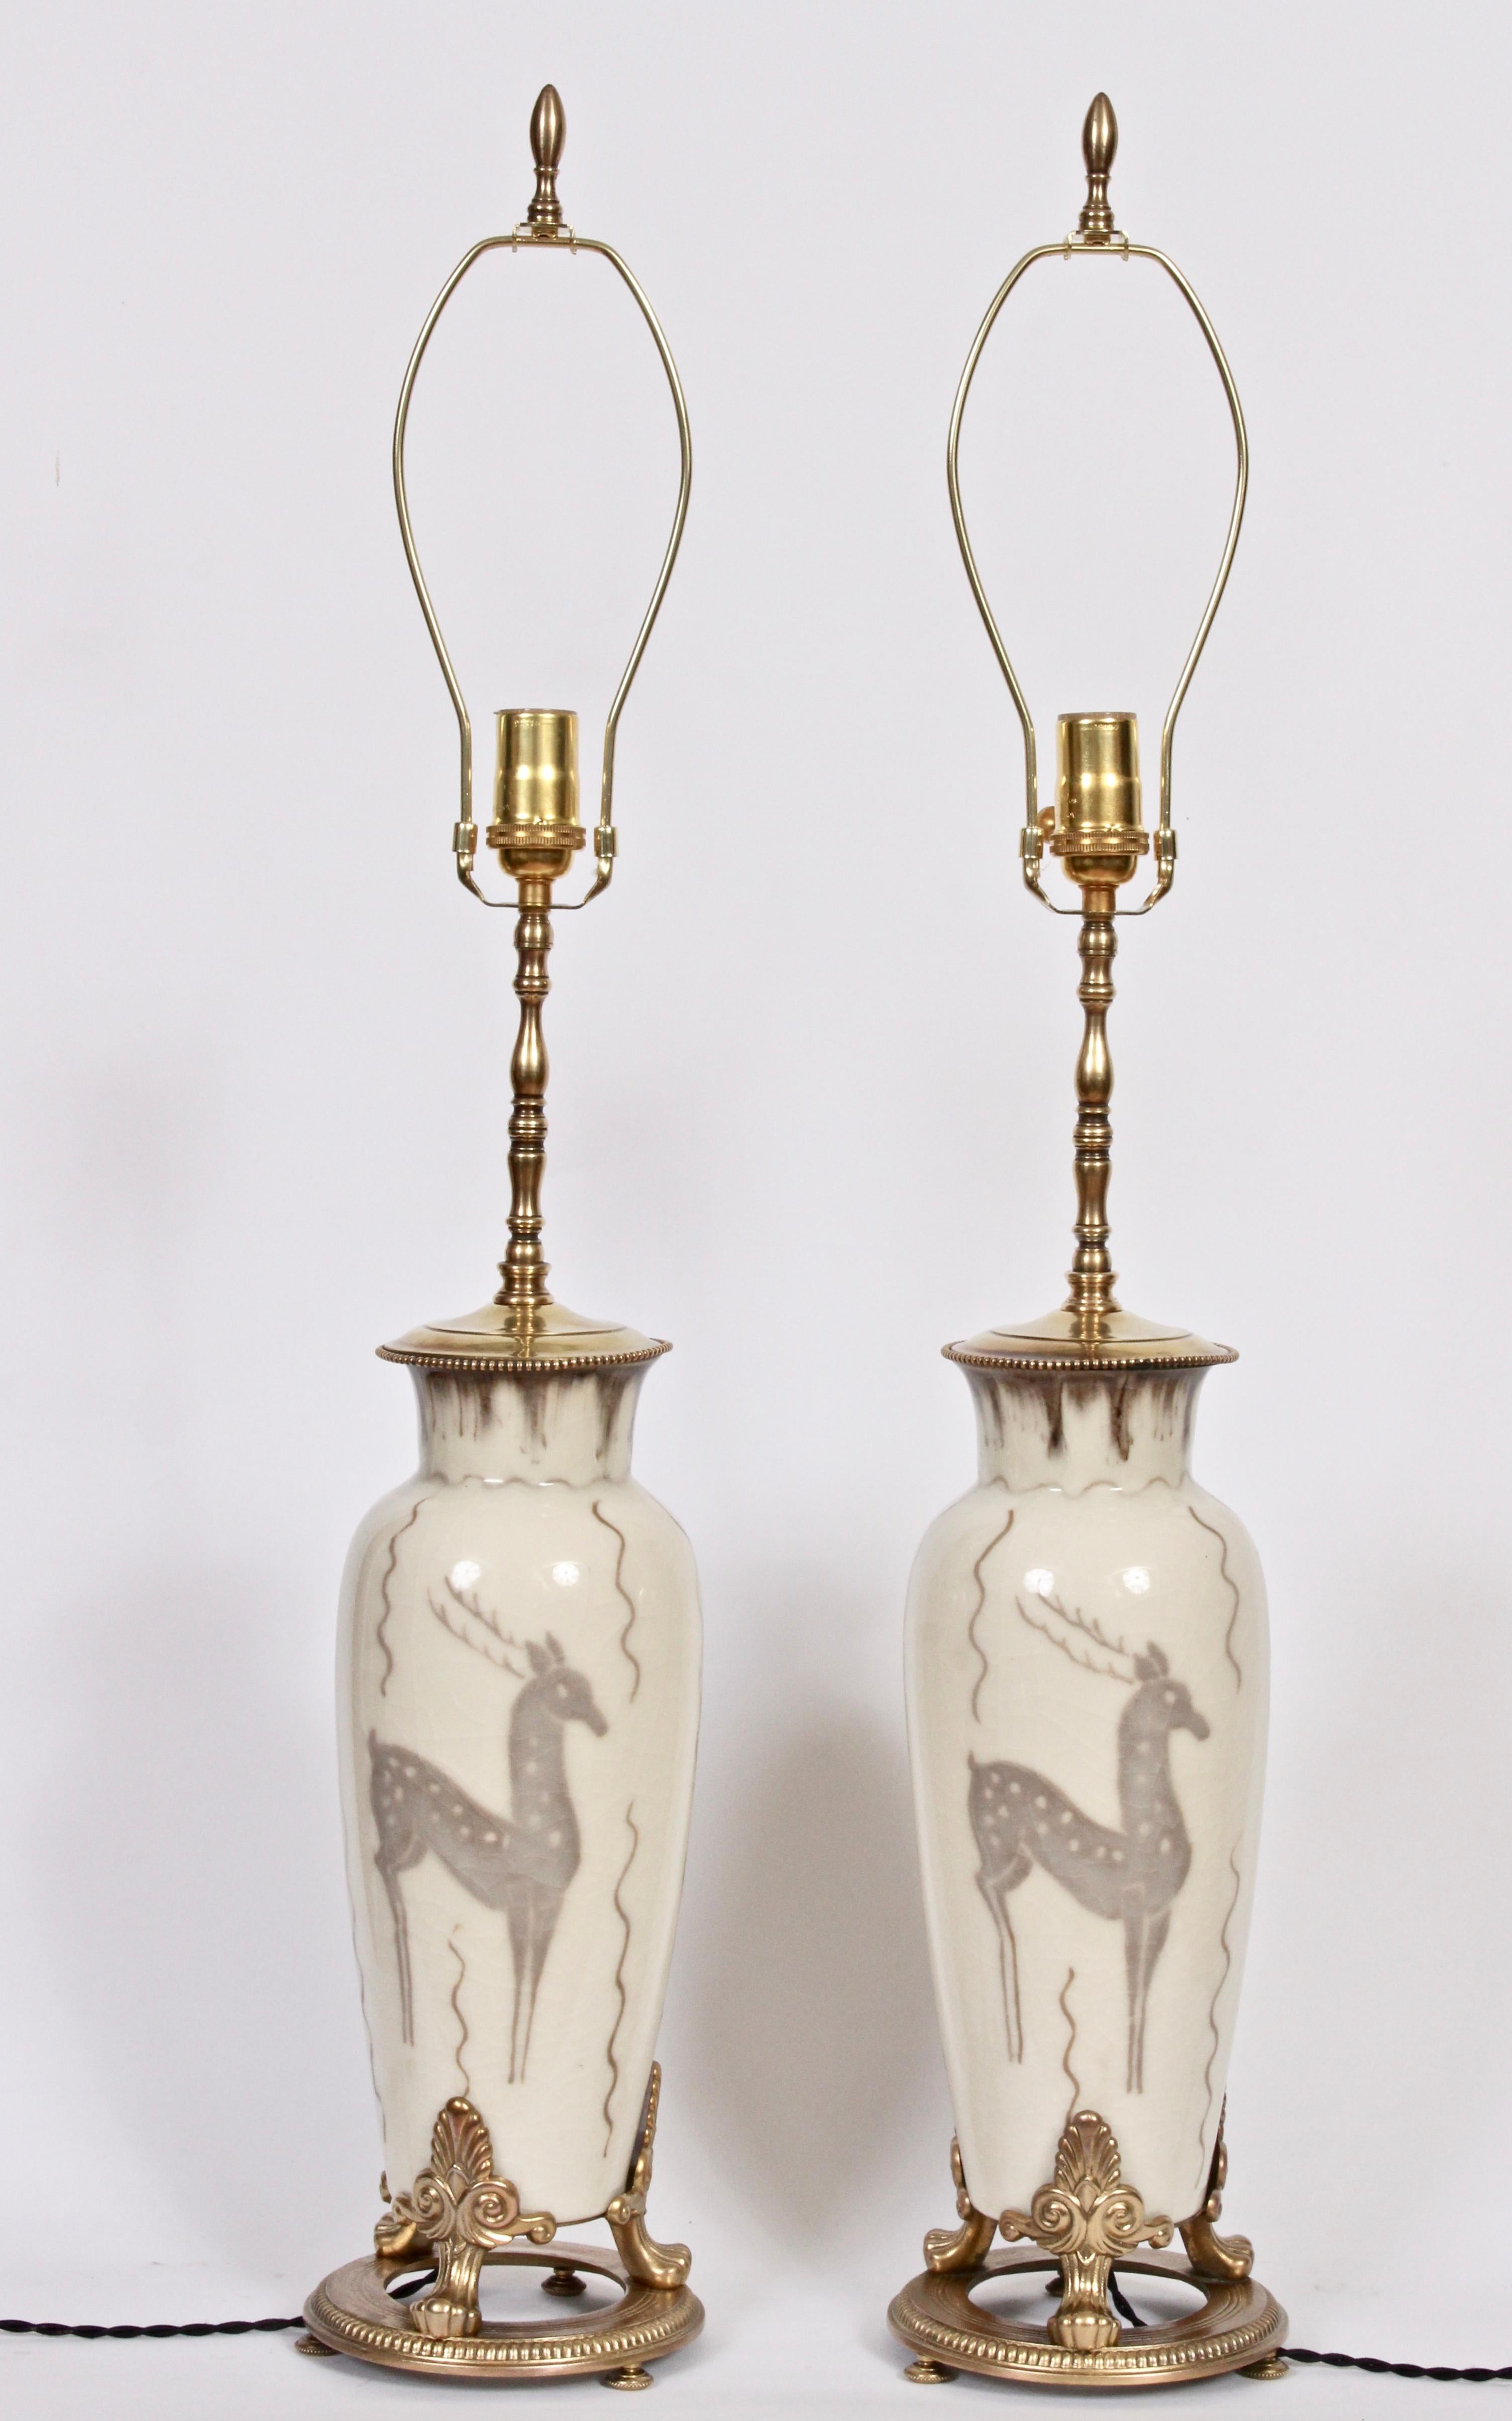 Majestic pair of Rookwood Pottery Ceramic Table Lamps hand painted by artist Loretta Holtkamp, 1949. Featuring a tapered form with flared rim, decorative Brass neck, overall crackle glaze with brown drip glaze at neck, neutral coloration,